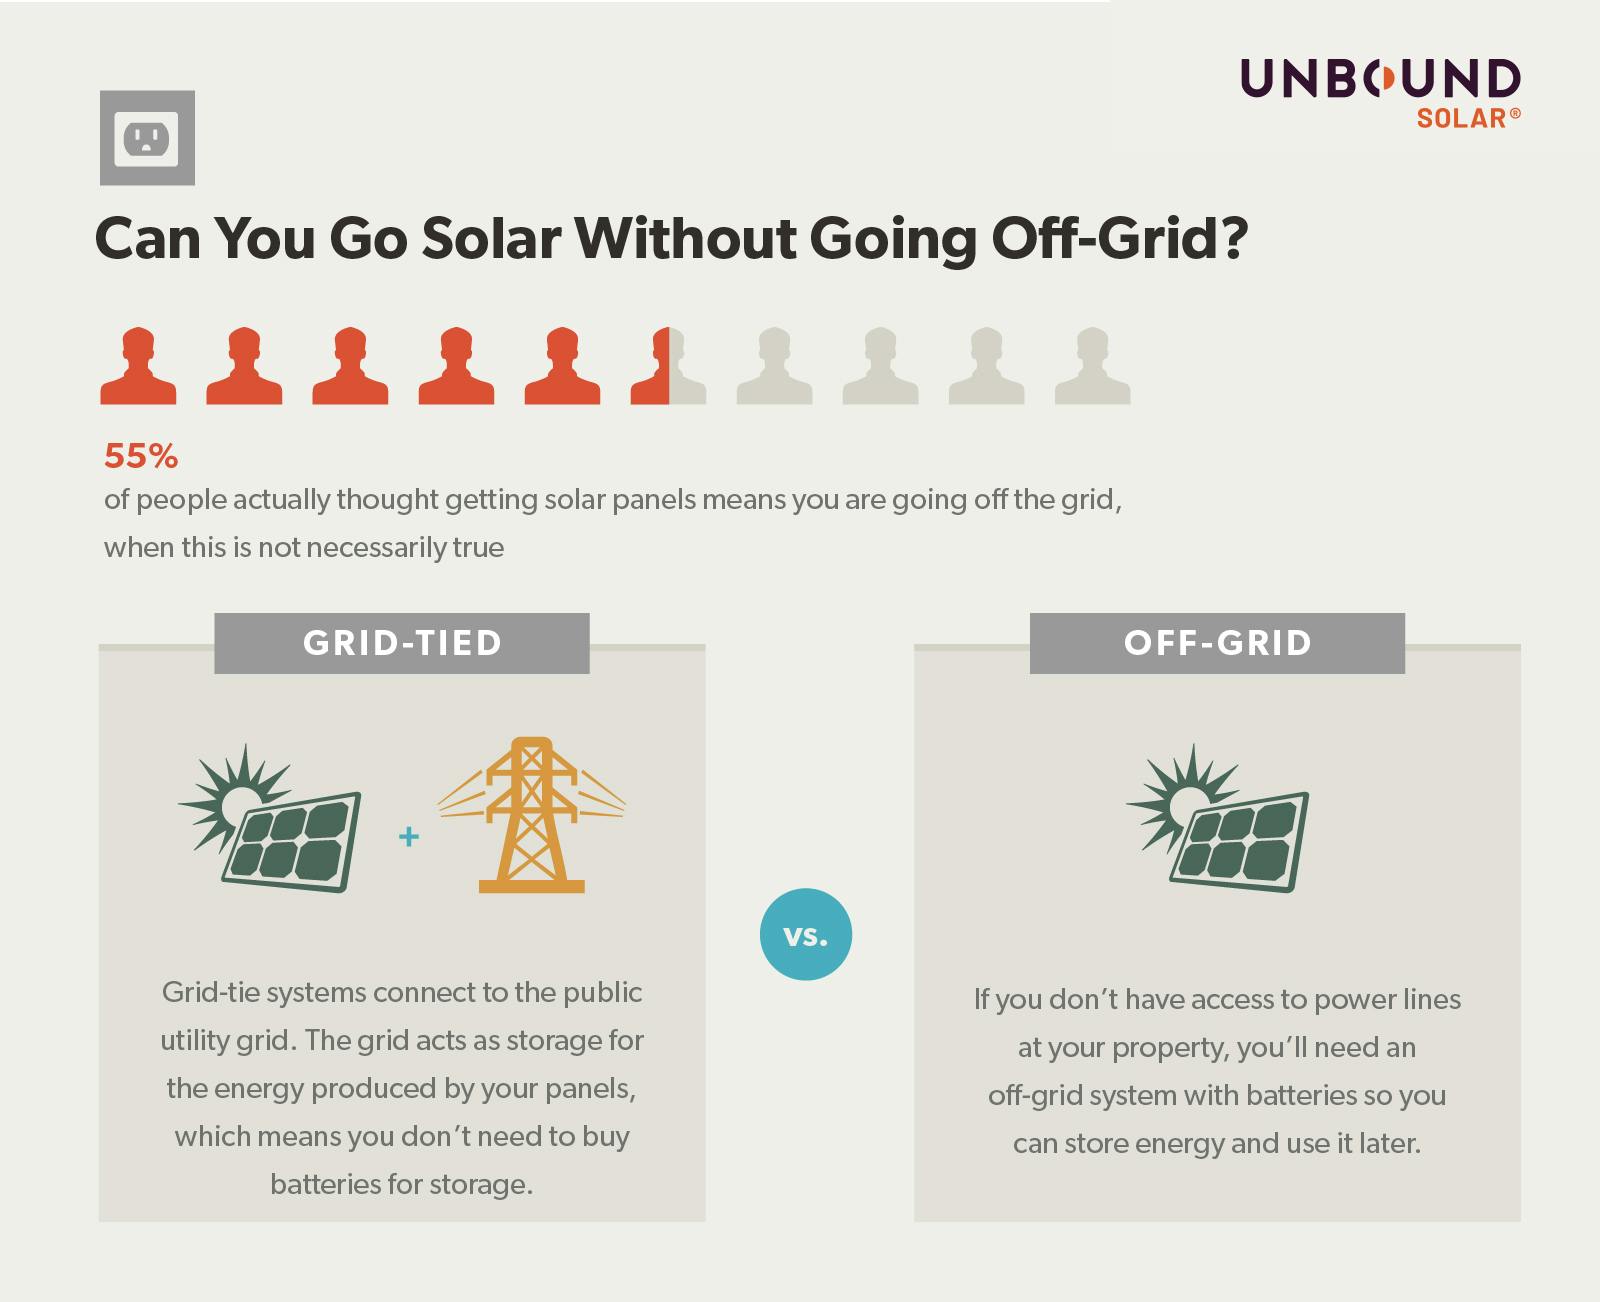 Image showing people perceptions of off-grid solar with 55% of people thinking getting solar panels means going off-grid when this is not always the case.